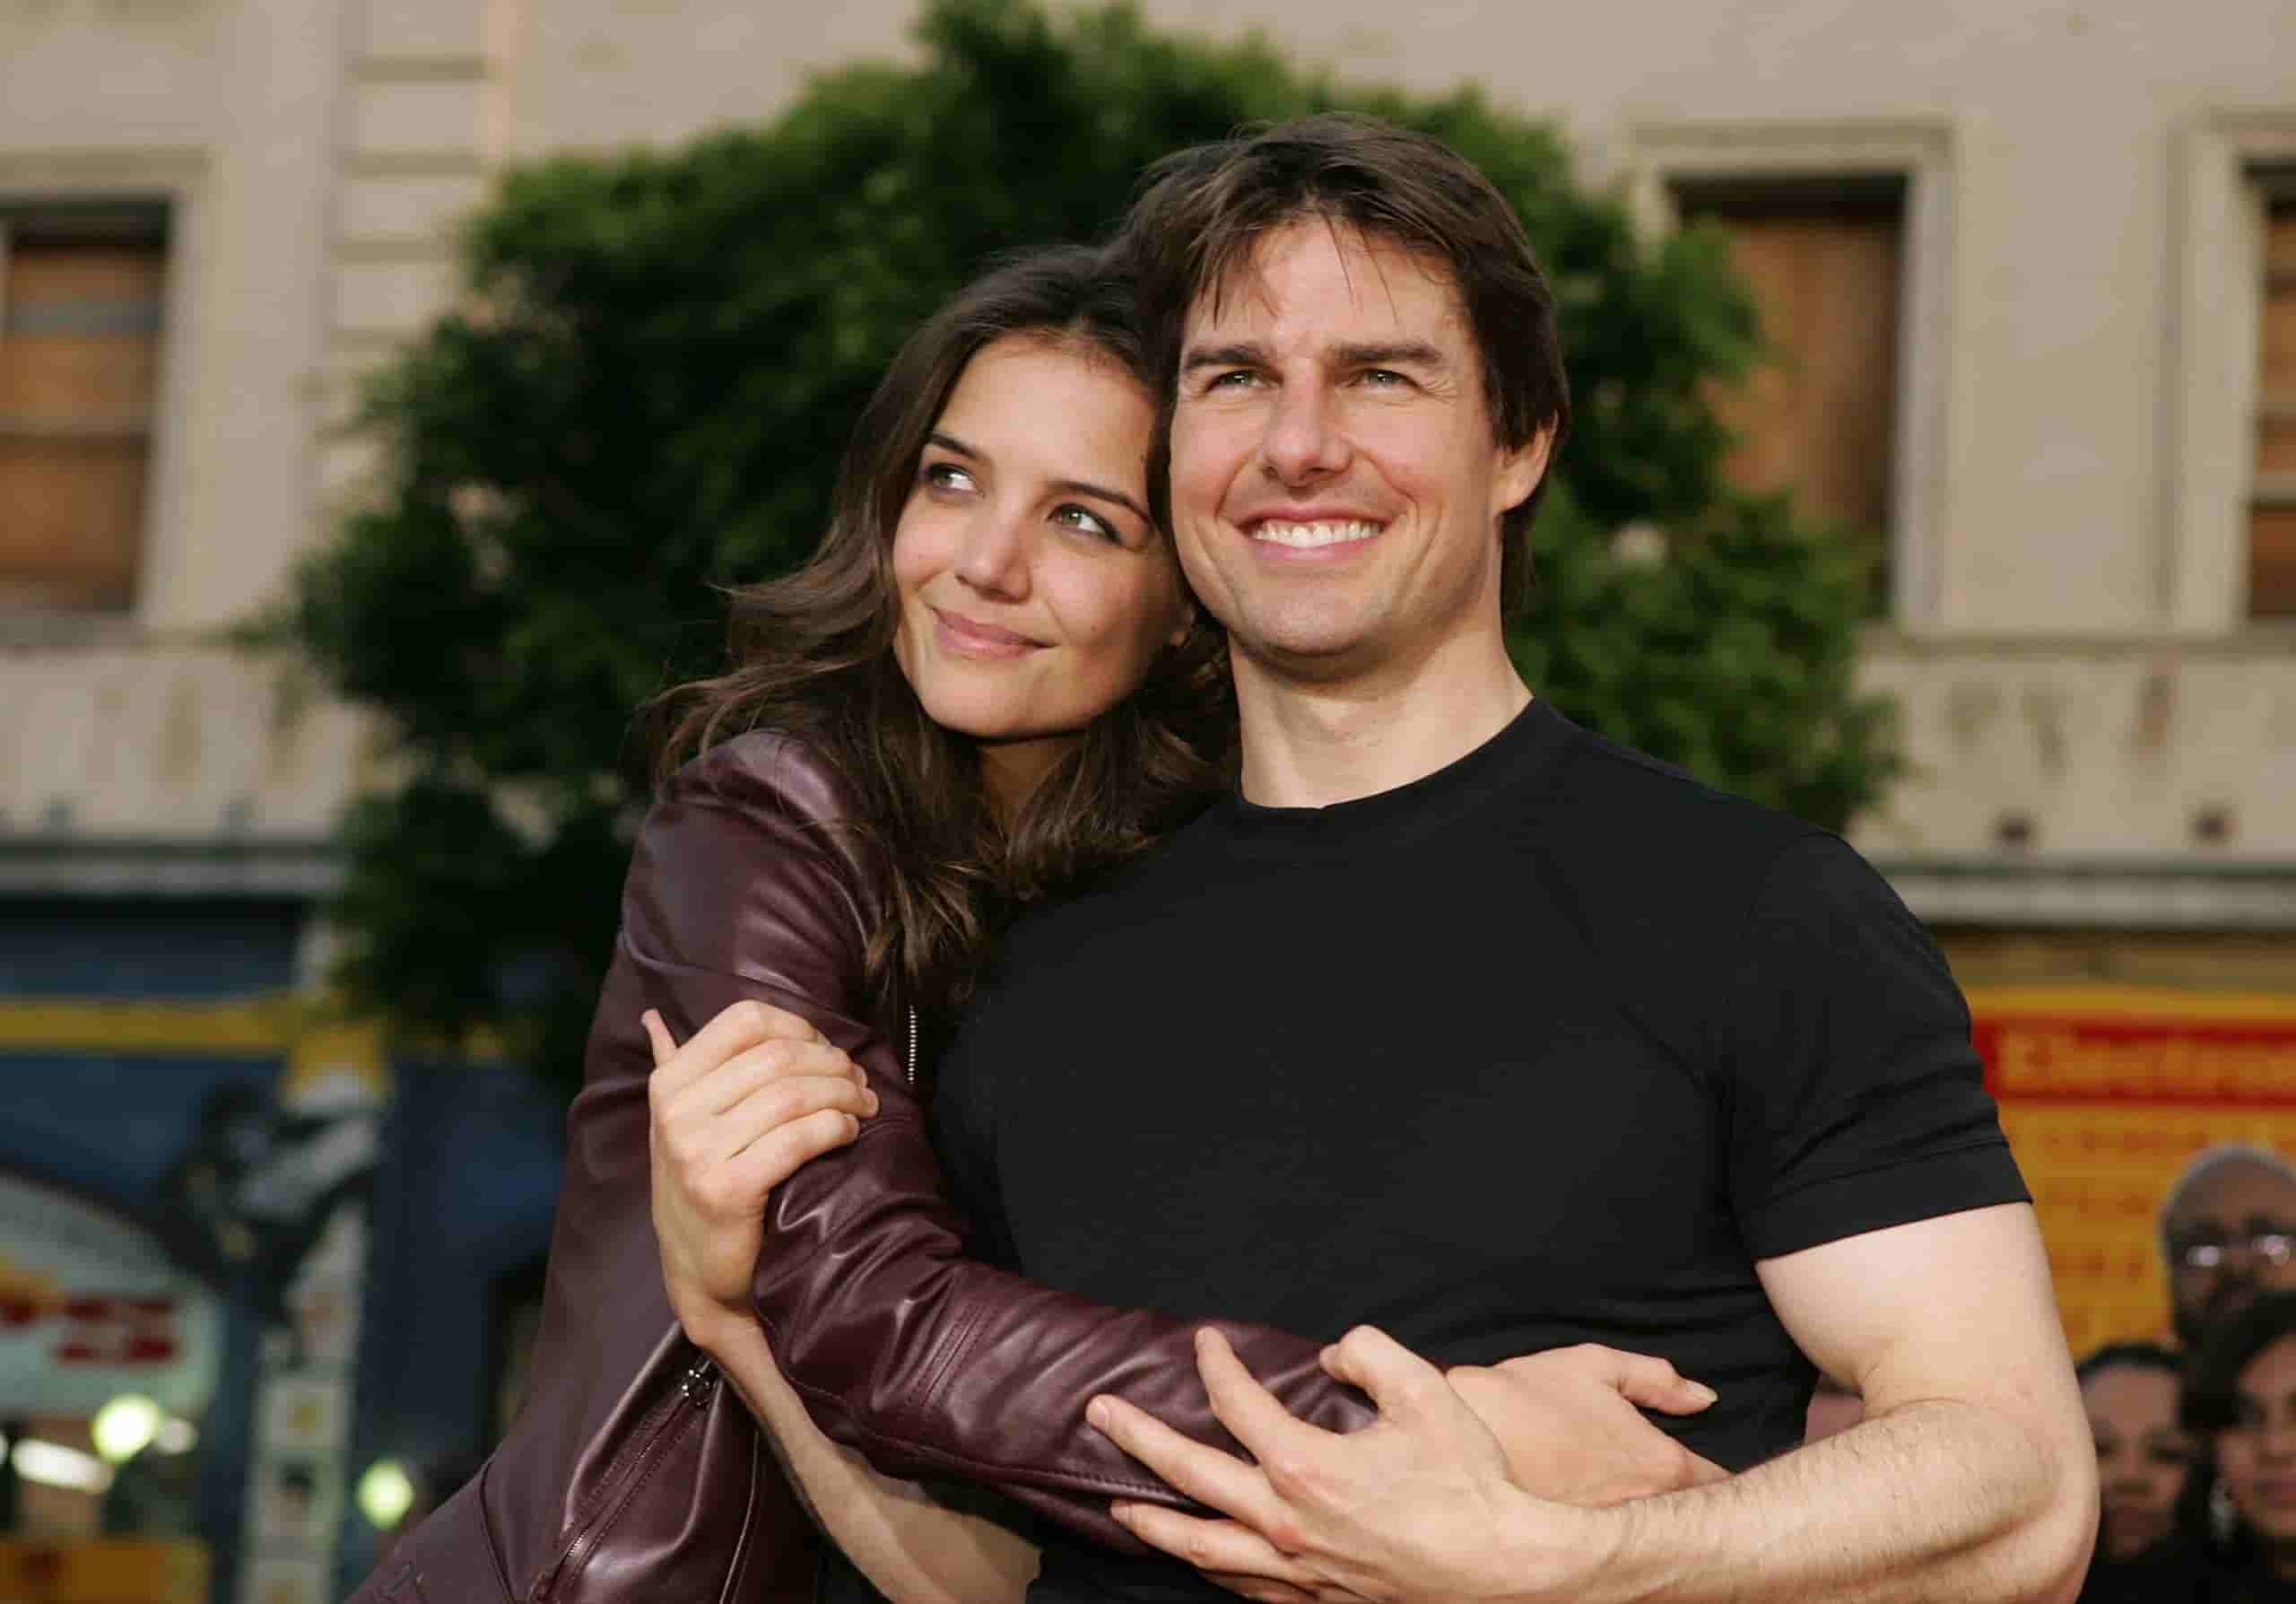 Katie with Tom Cruise